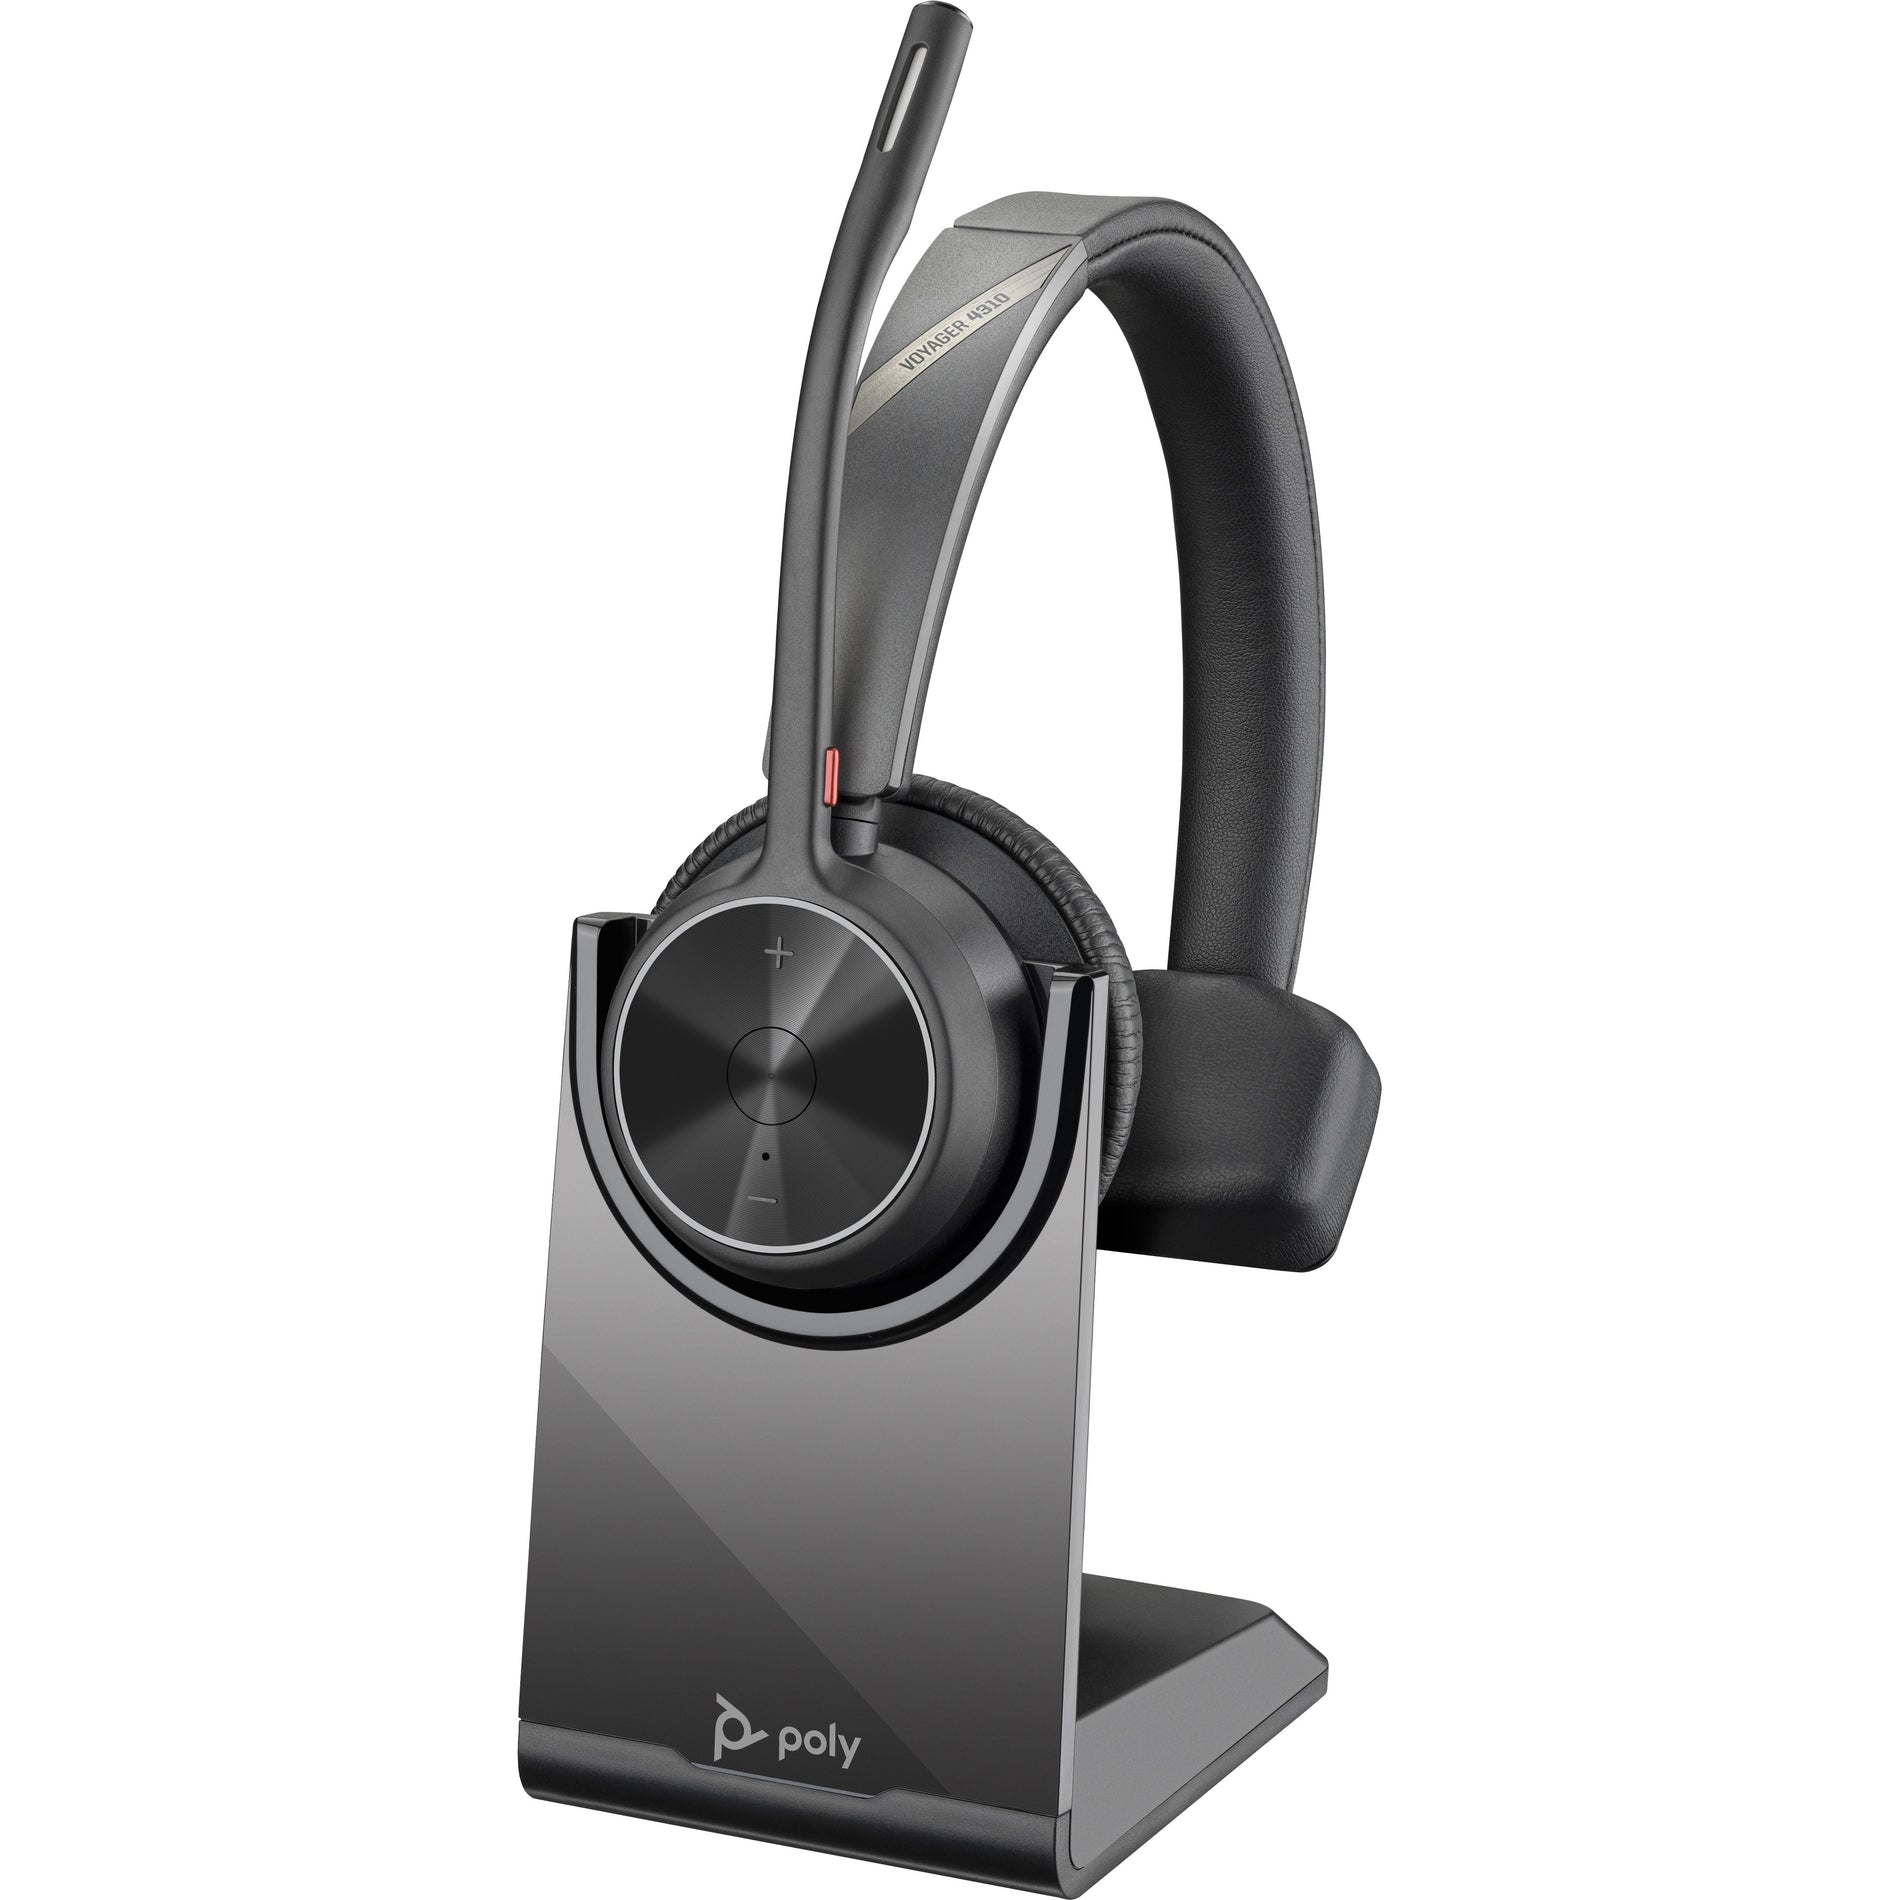 Poly 77Y92AA Voyager 4300 UC 4310 Headset, Wireless Bluetooth 5.1, Mono Sound, Noise Reduction